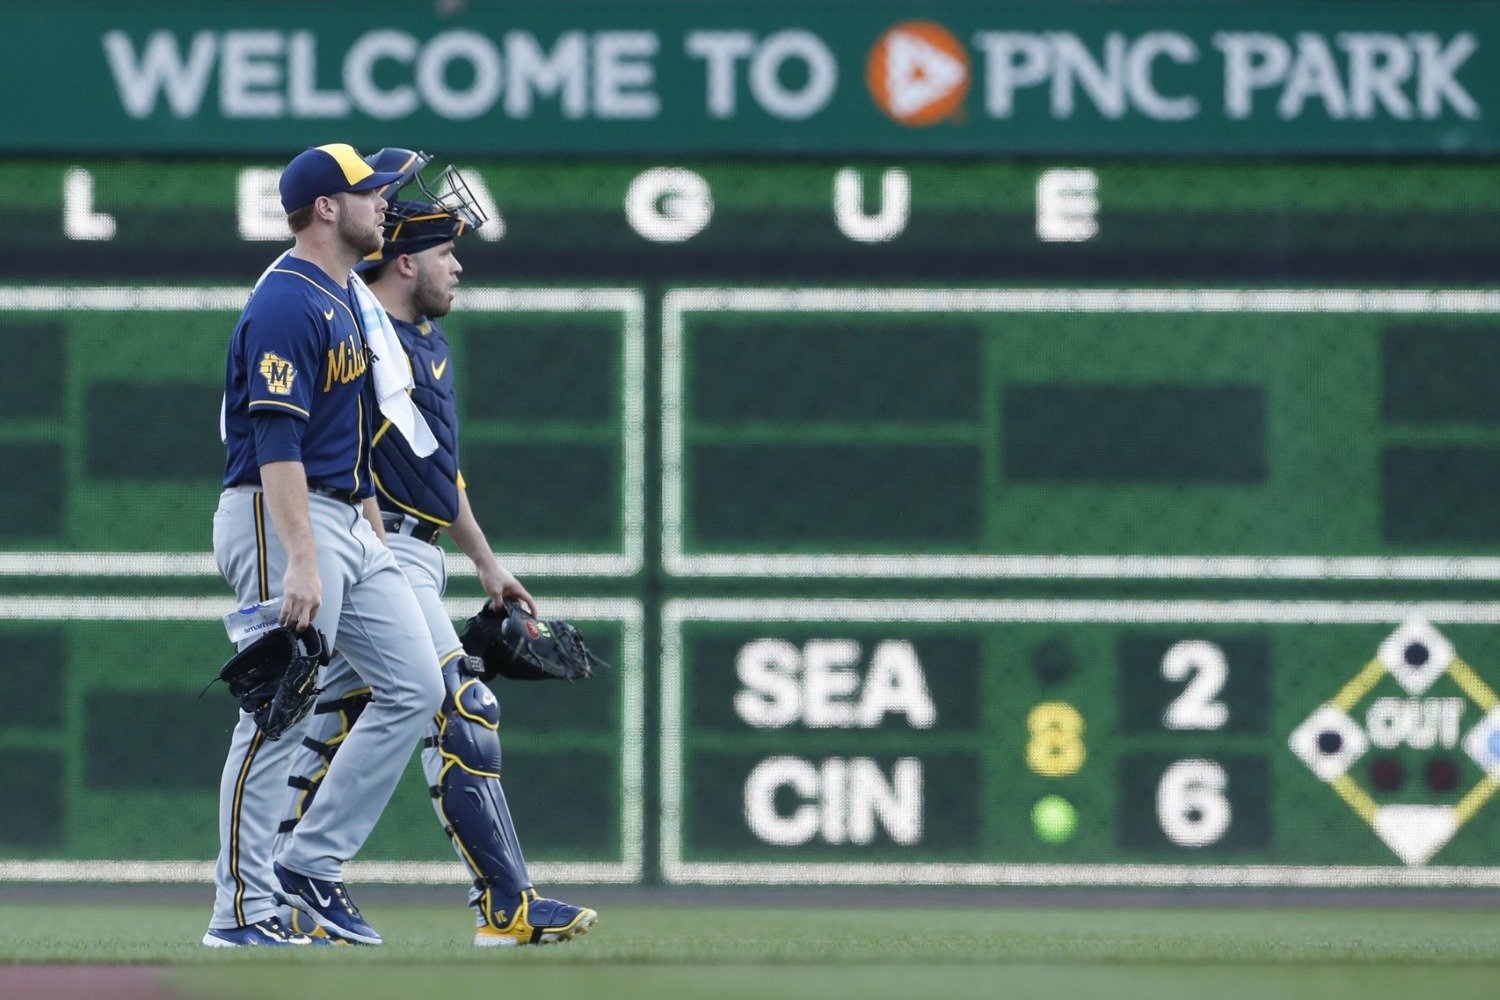 Milwaukee Brewers Roster Has One Glaring Need for 2021 